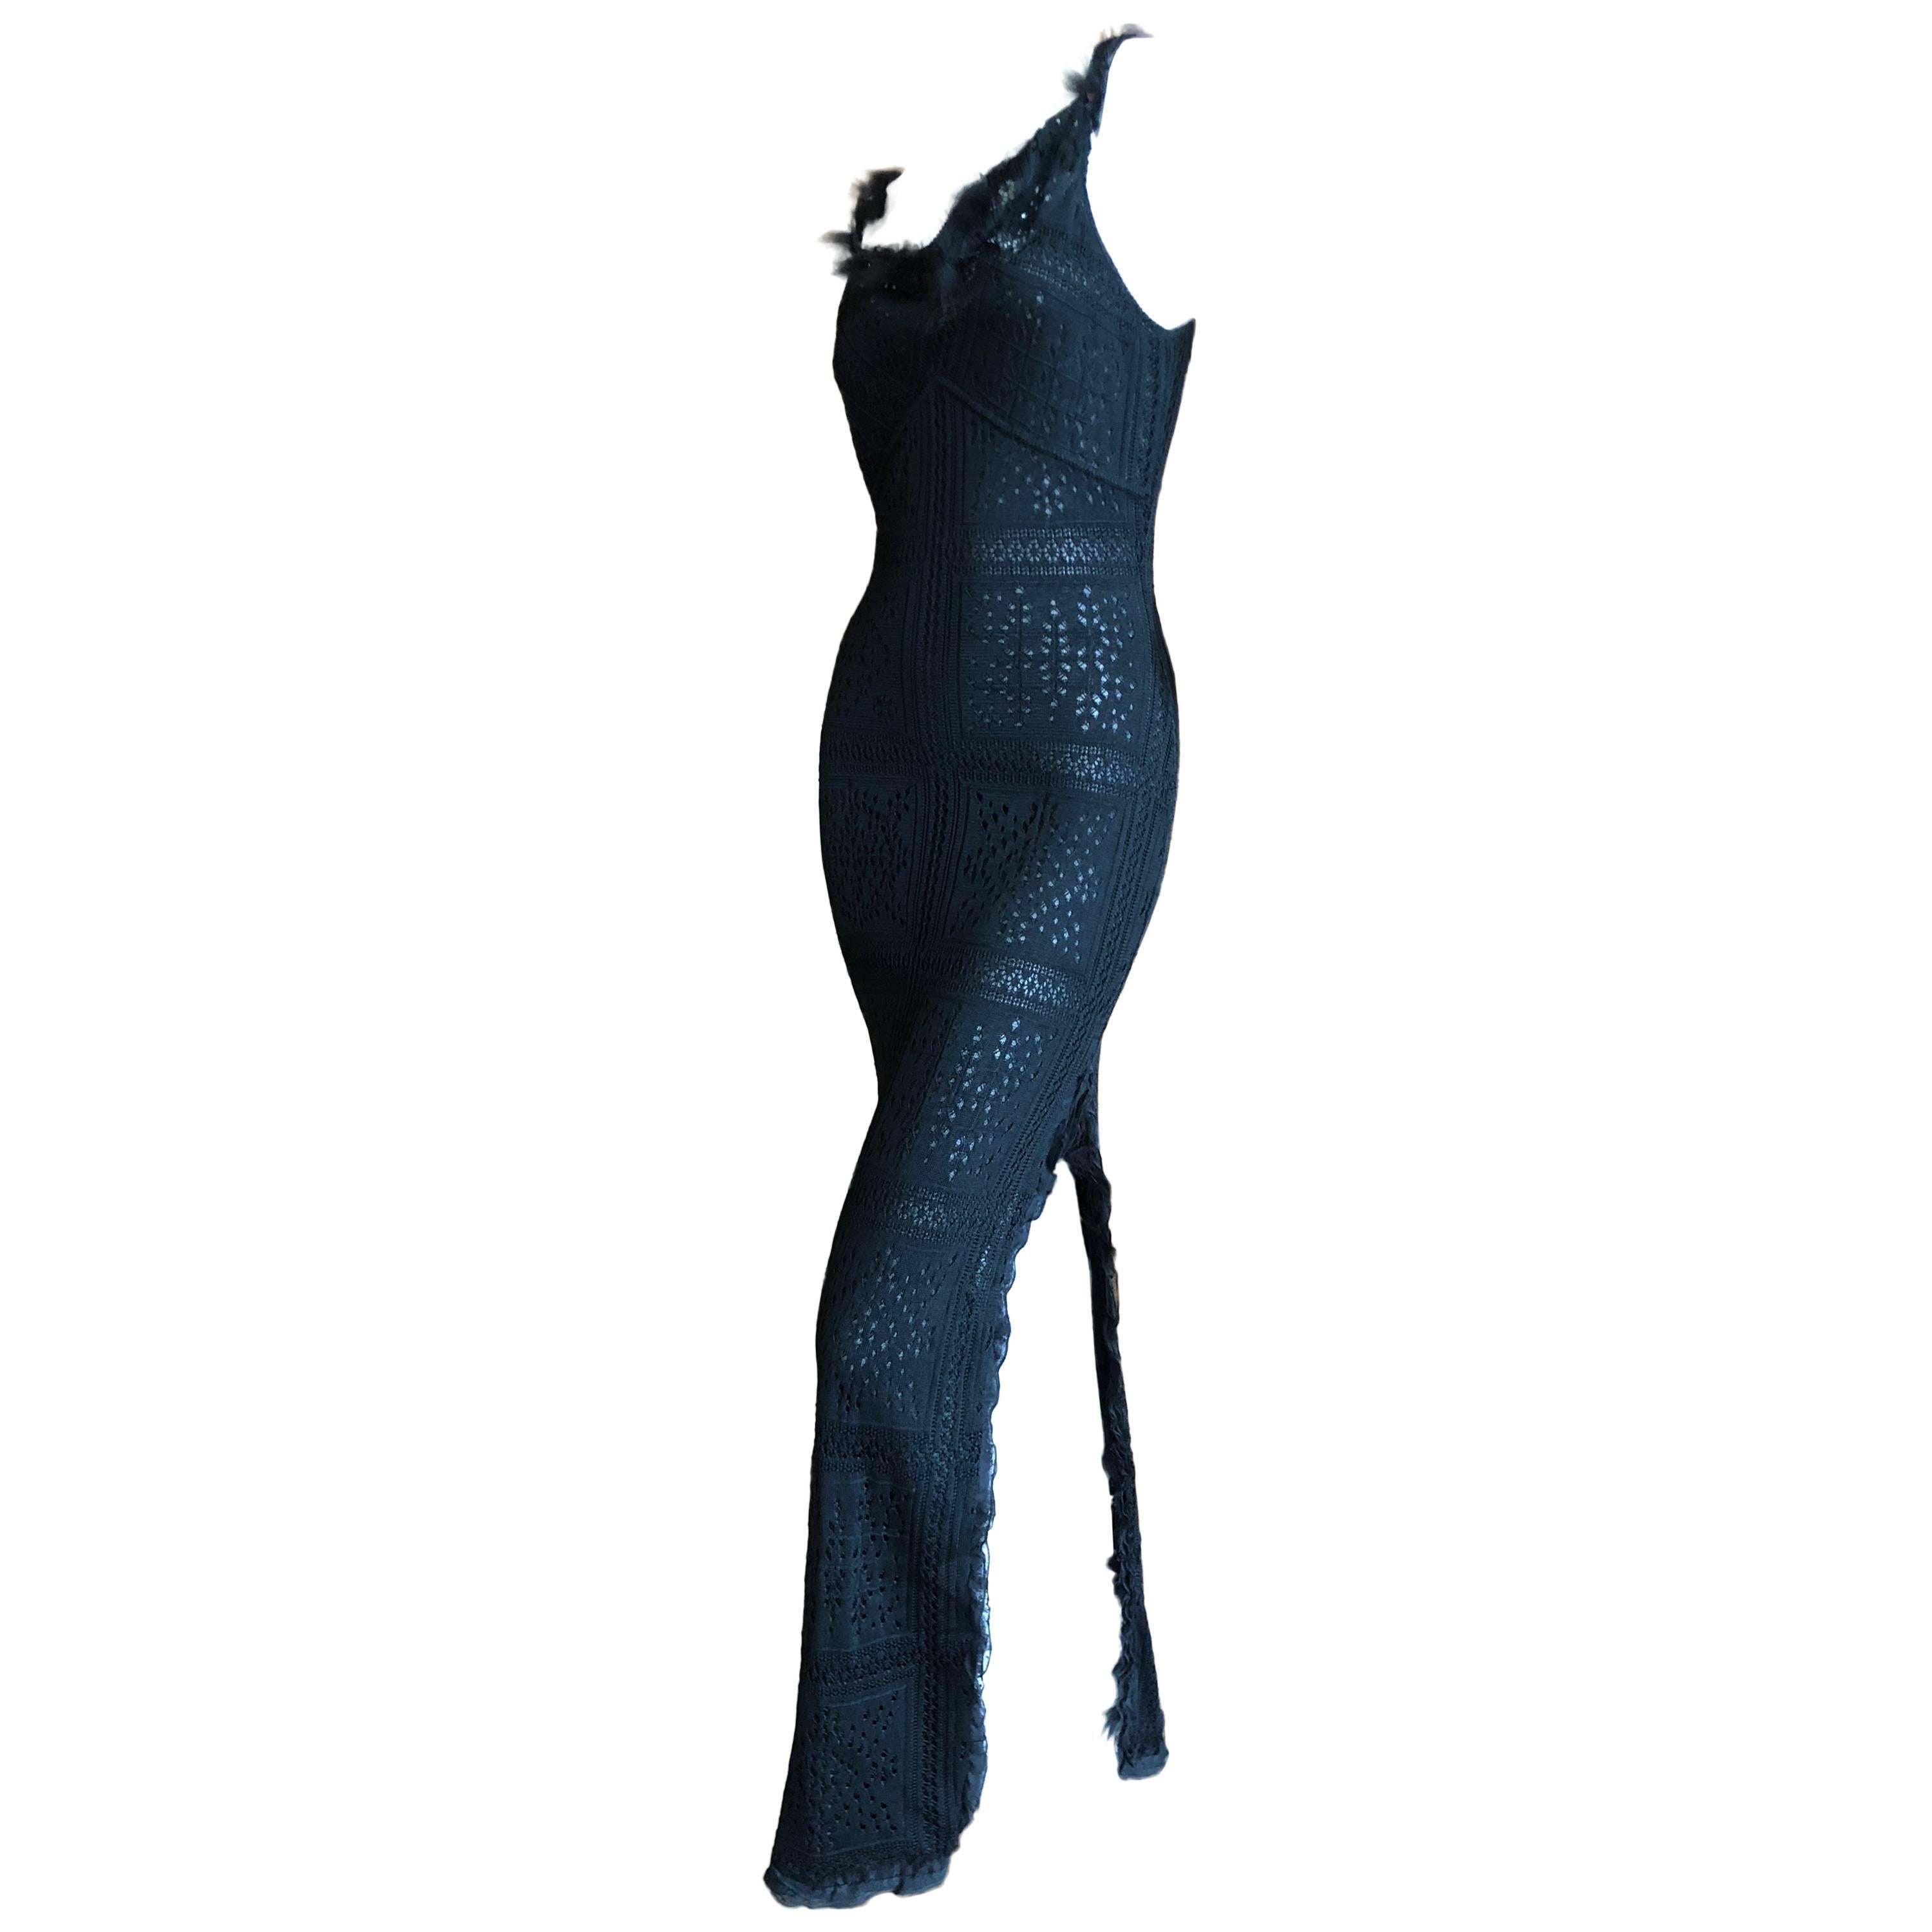 John Galliano Label Sheer Black Knit High Slit Feather Trim Dress, Early 1990s For Sale